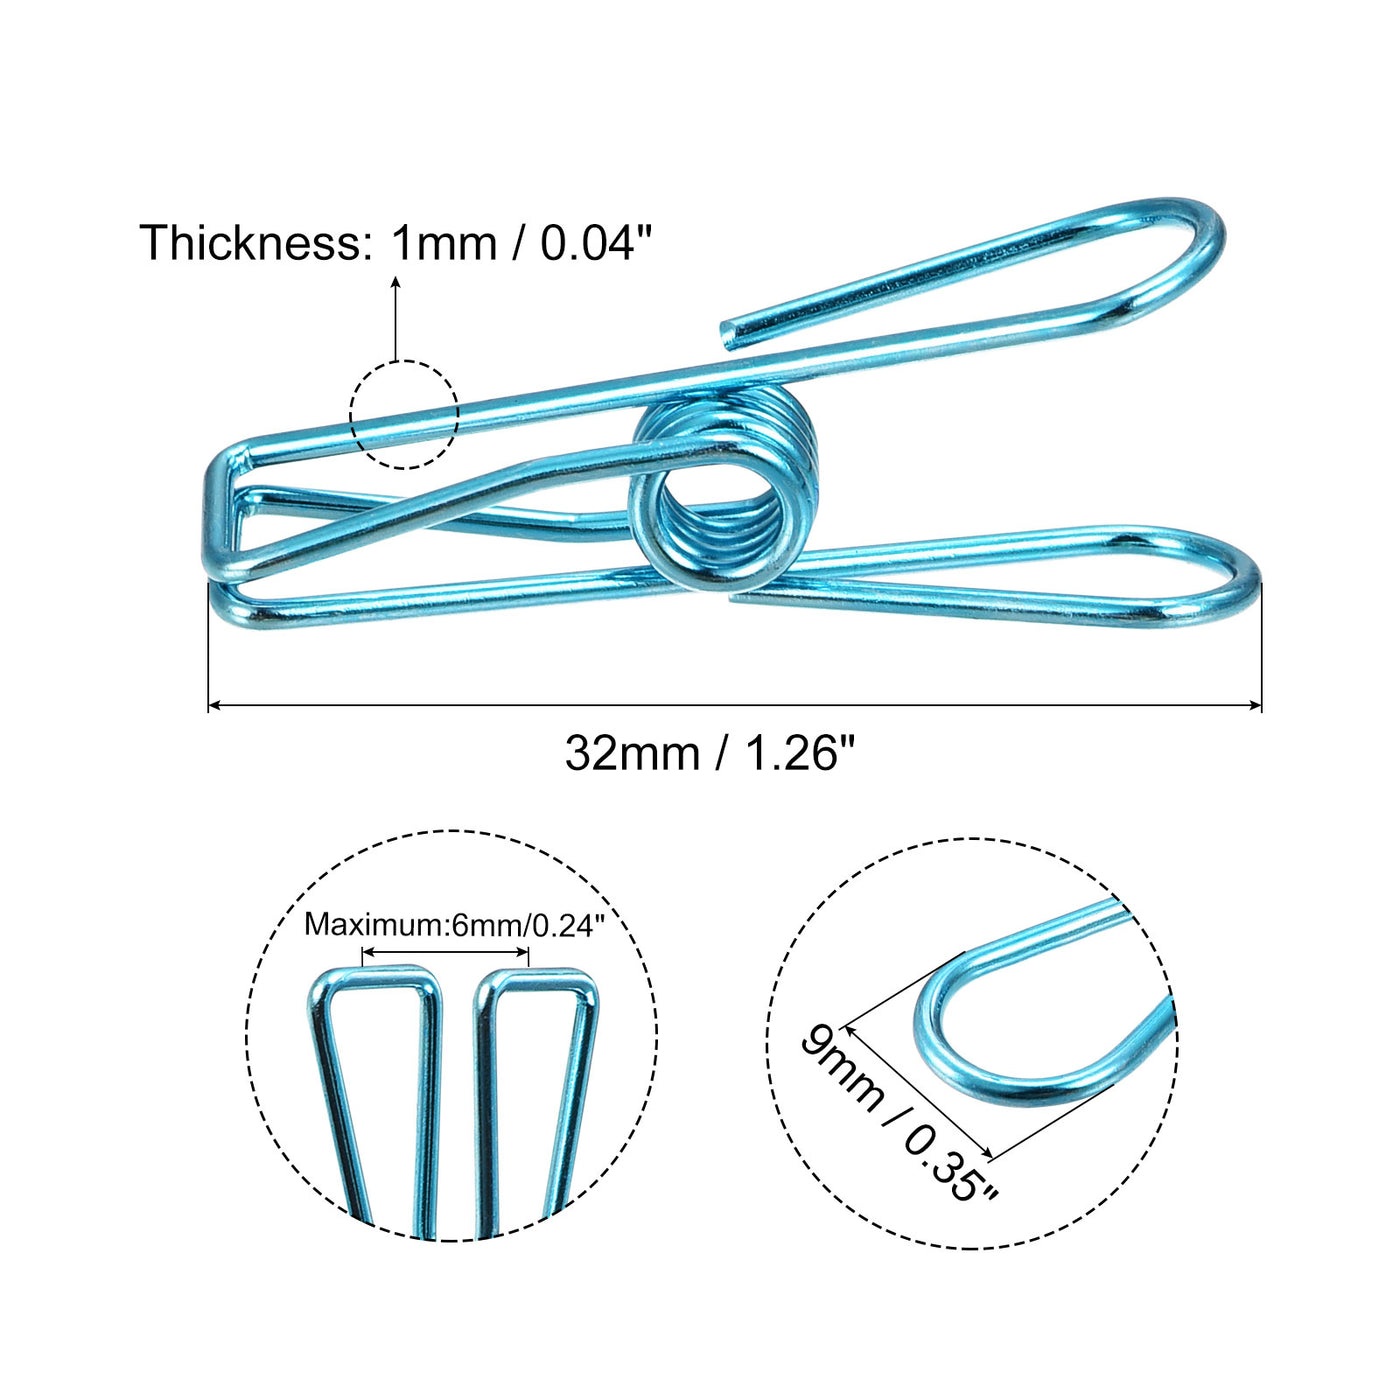 uxcell Uxcell Tablecloth Clips, 32mm Carbon Steel Clamps for Fixing Table Cloth, Blue 16 Pcs